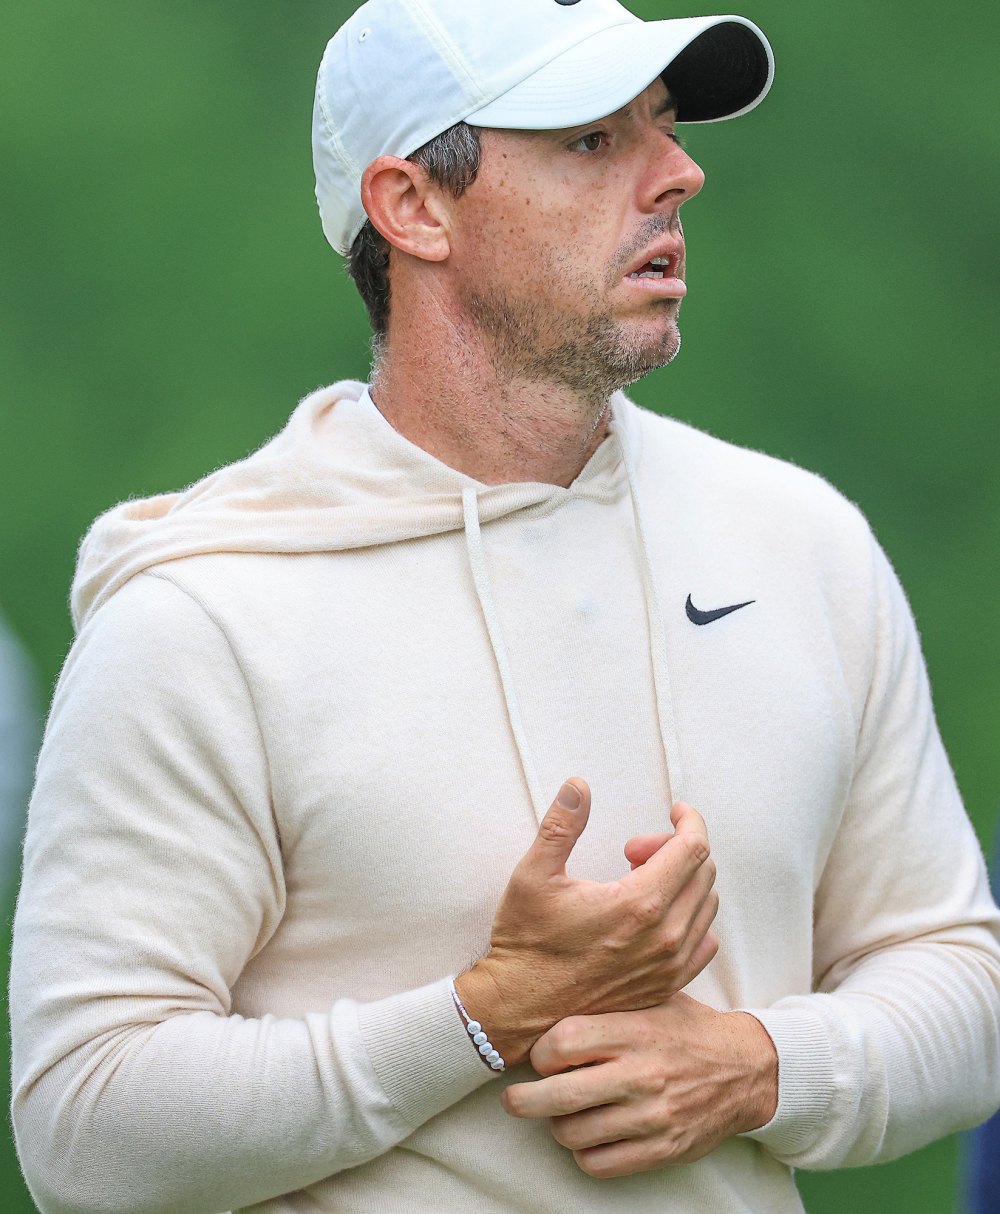 Golfer Rory McIlroy Ditches His Wedding Ring After Filing for Divorce From Erica Stoll